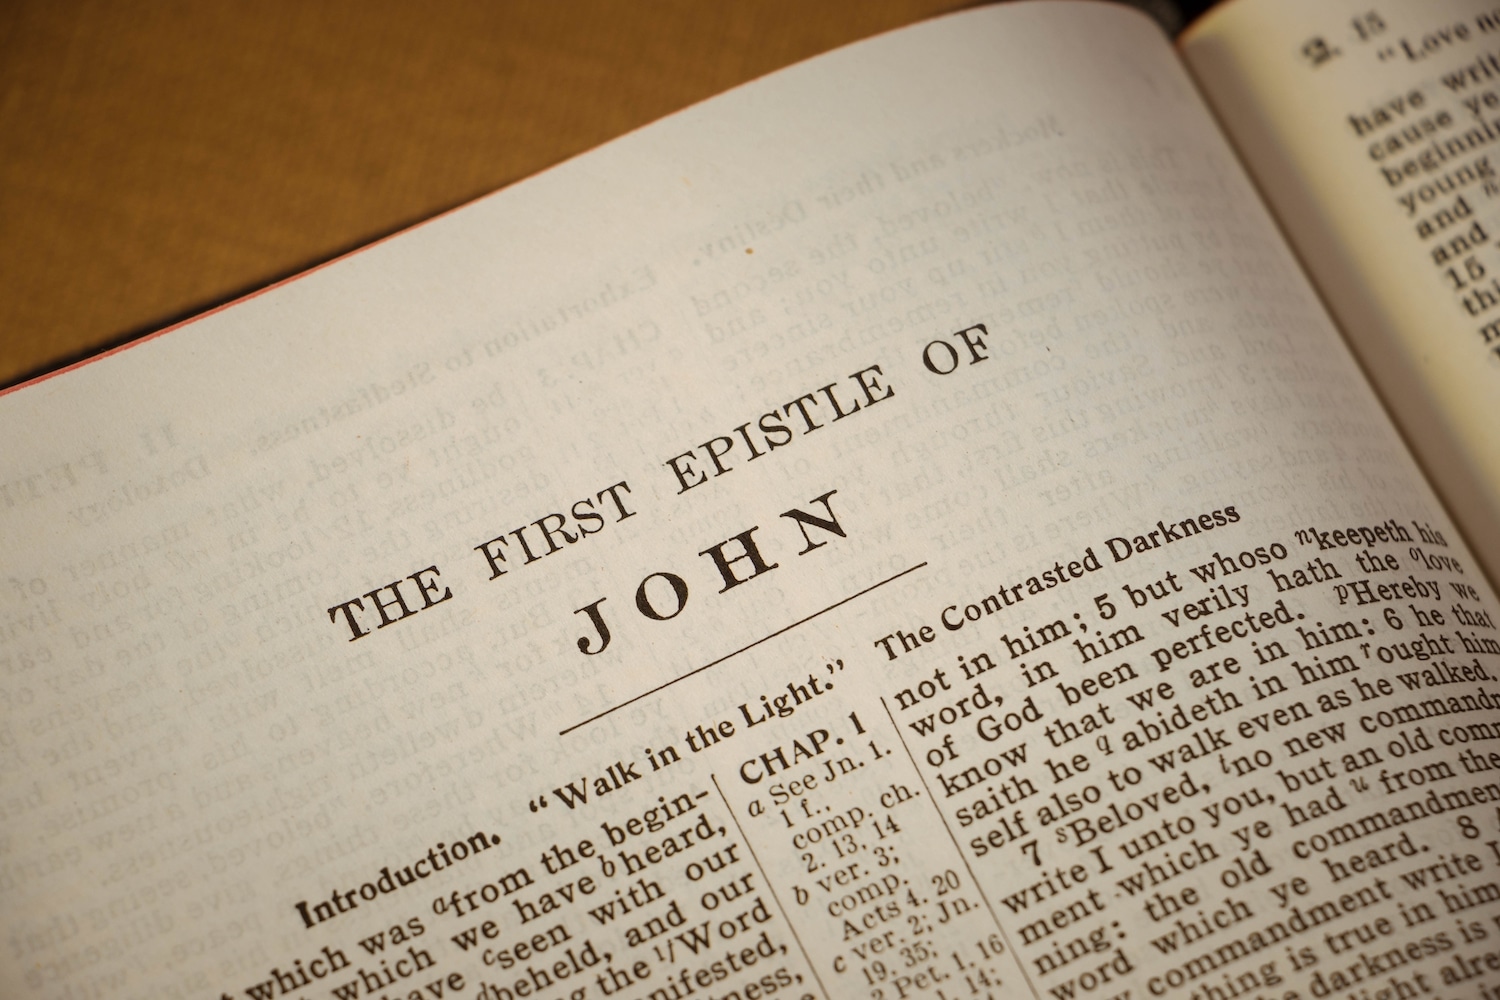 An image of the first page of the First Epistle of John in the Bible